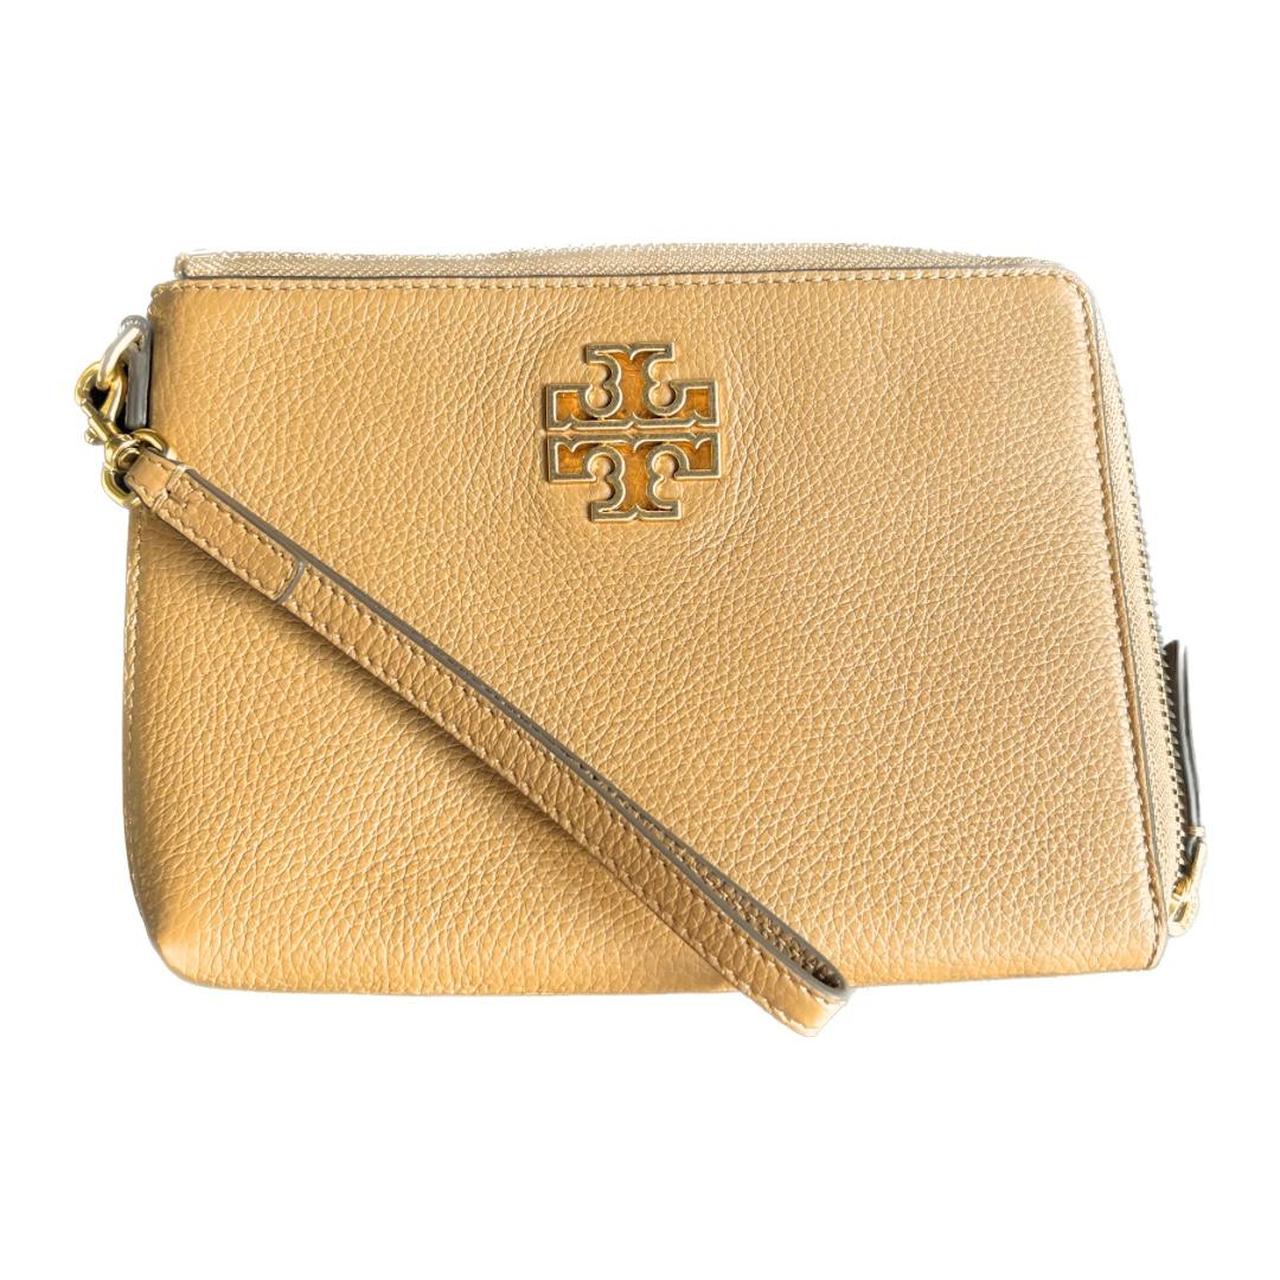 New❤Tory burch outlet THEA SMALL BUCKET BAG - YouTube